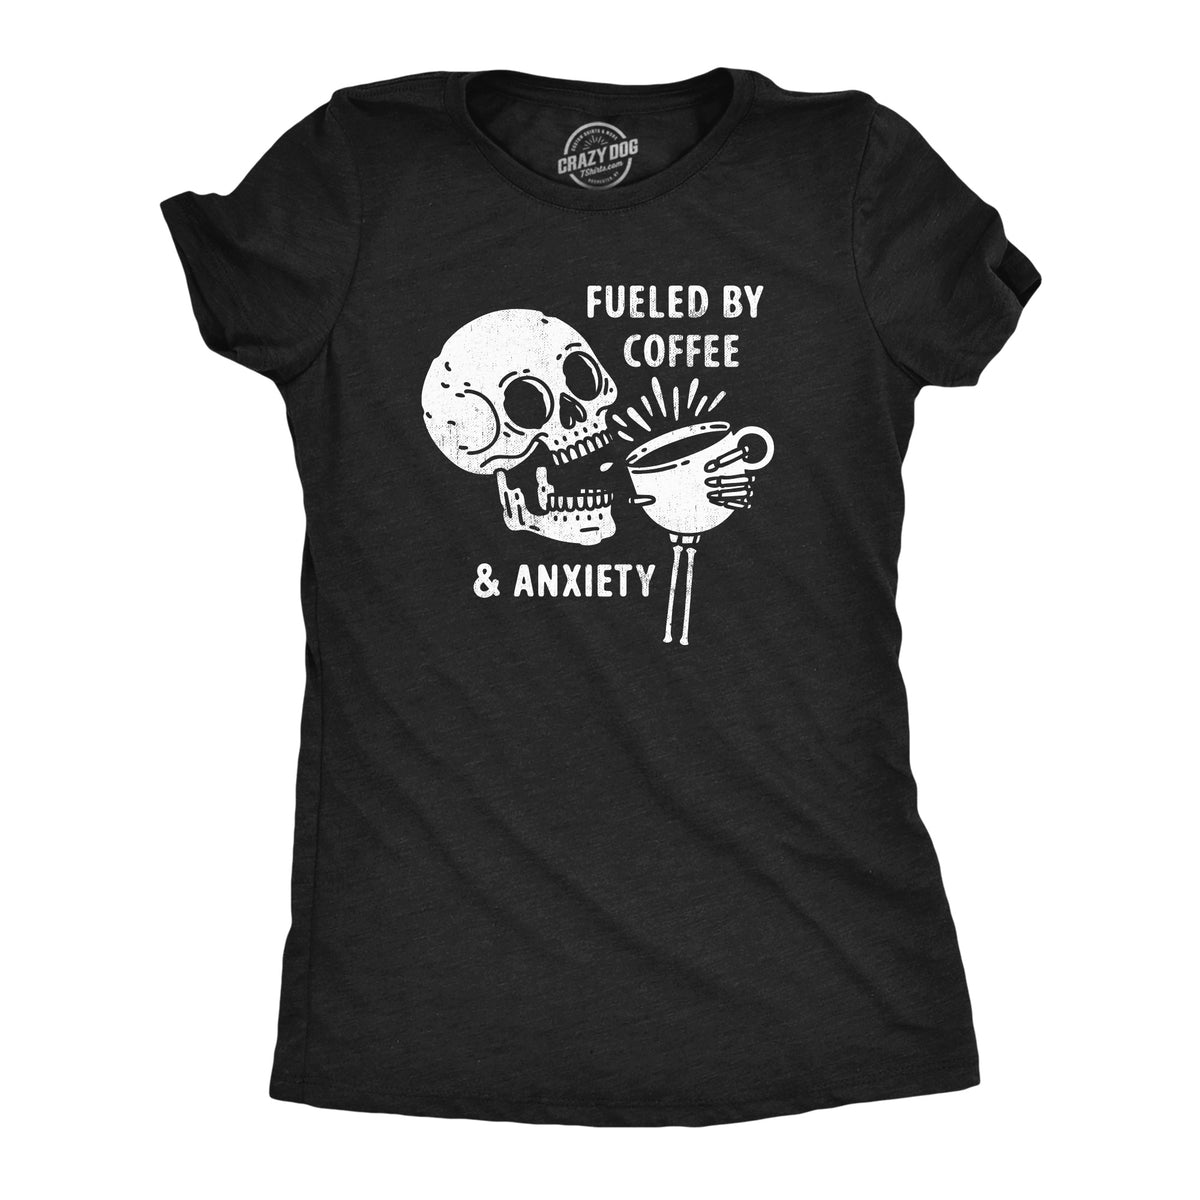 Funny Heather Black - ANXIETY Fueled By Coffee And Anxiety Womens T Shirt Nerdy Coffee Sarcastic Tee